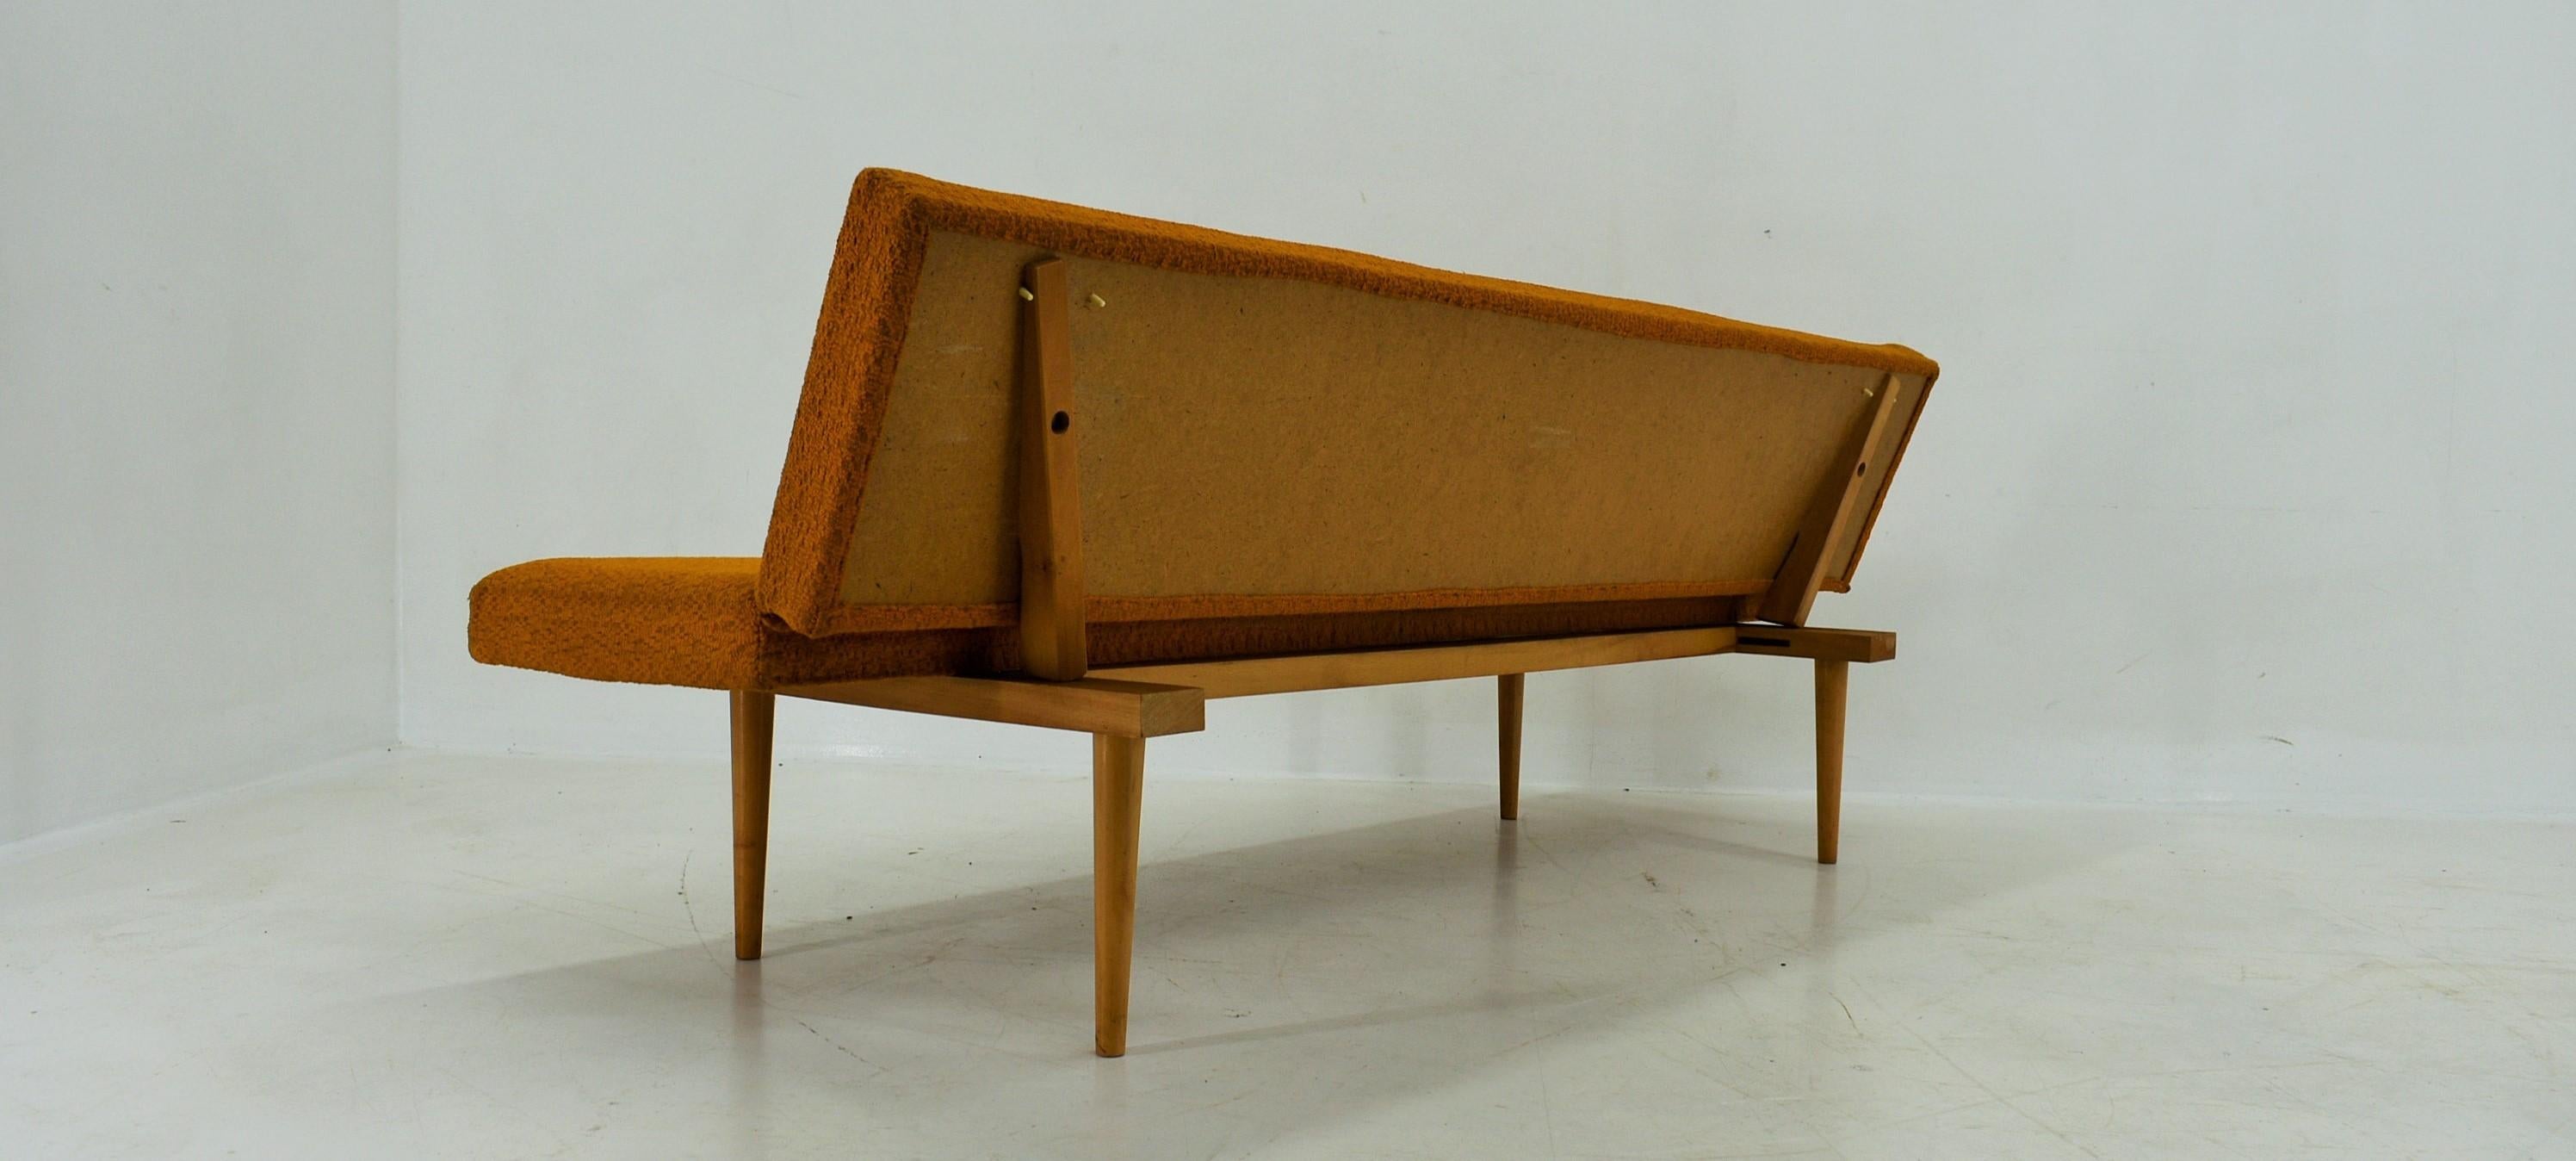 Mid-20th Century Midcentury Sofa / Daybed Designed by Miroslav Navratil, 1960s For Sale